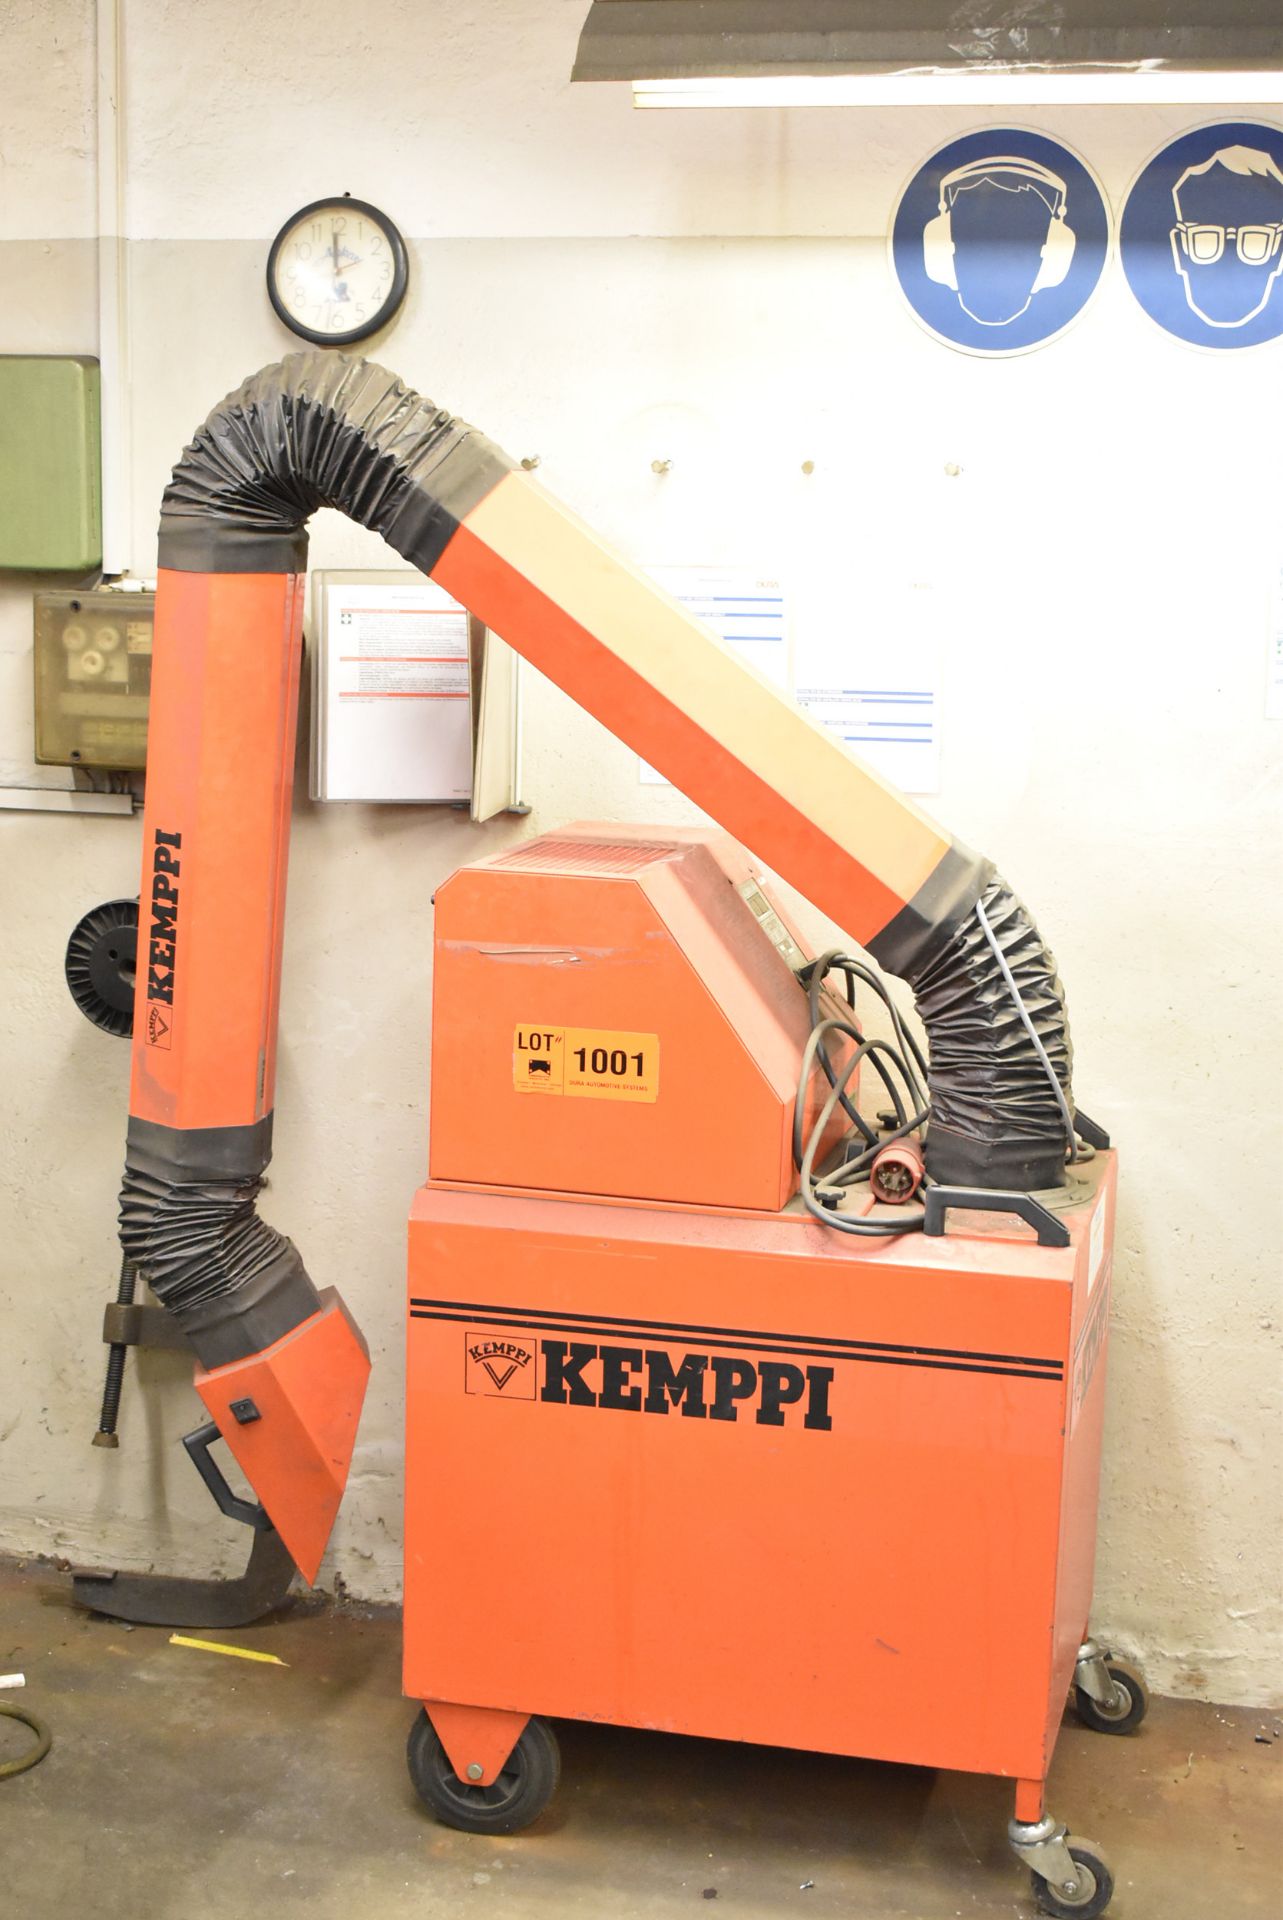 KEMPPI M1100 PORTABLE WELDING FUME EXTRACTOR, S/N N/A (SEL) [Removal Fee = € 27.50 + applicable